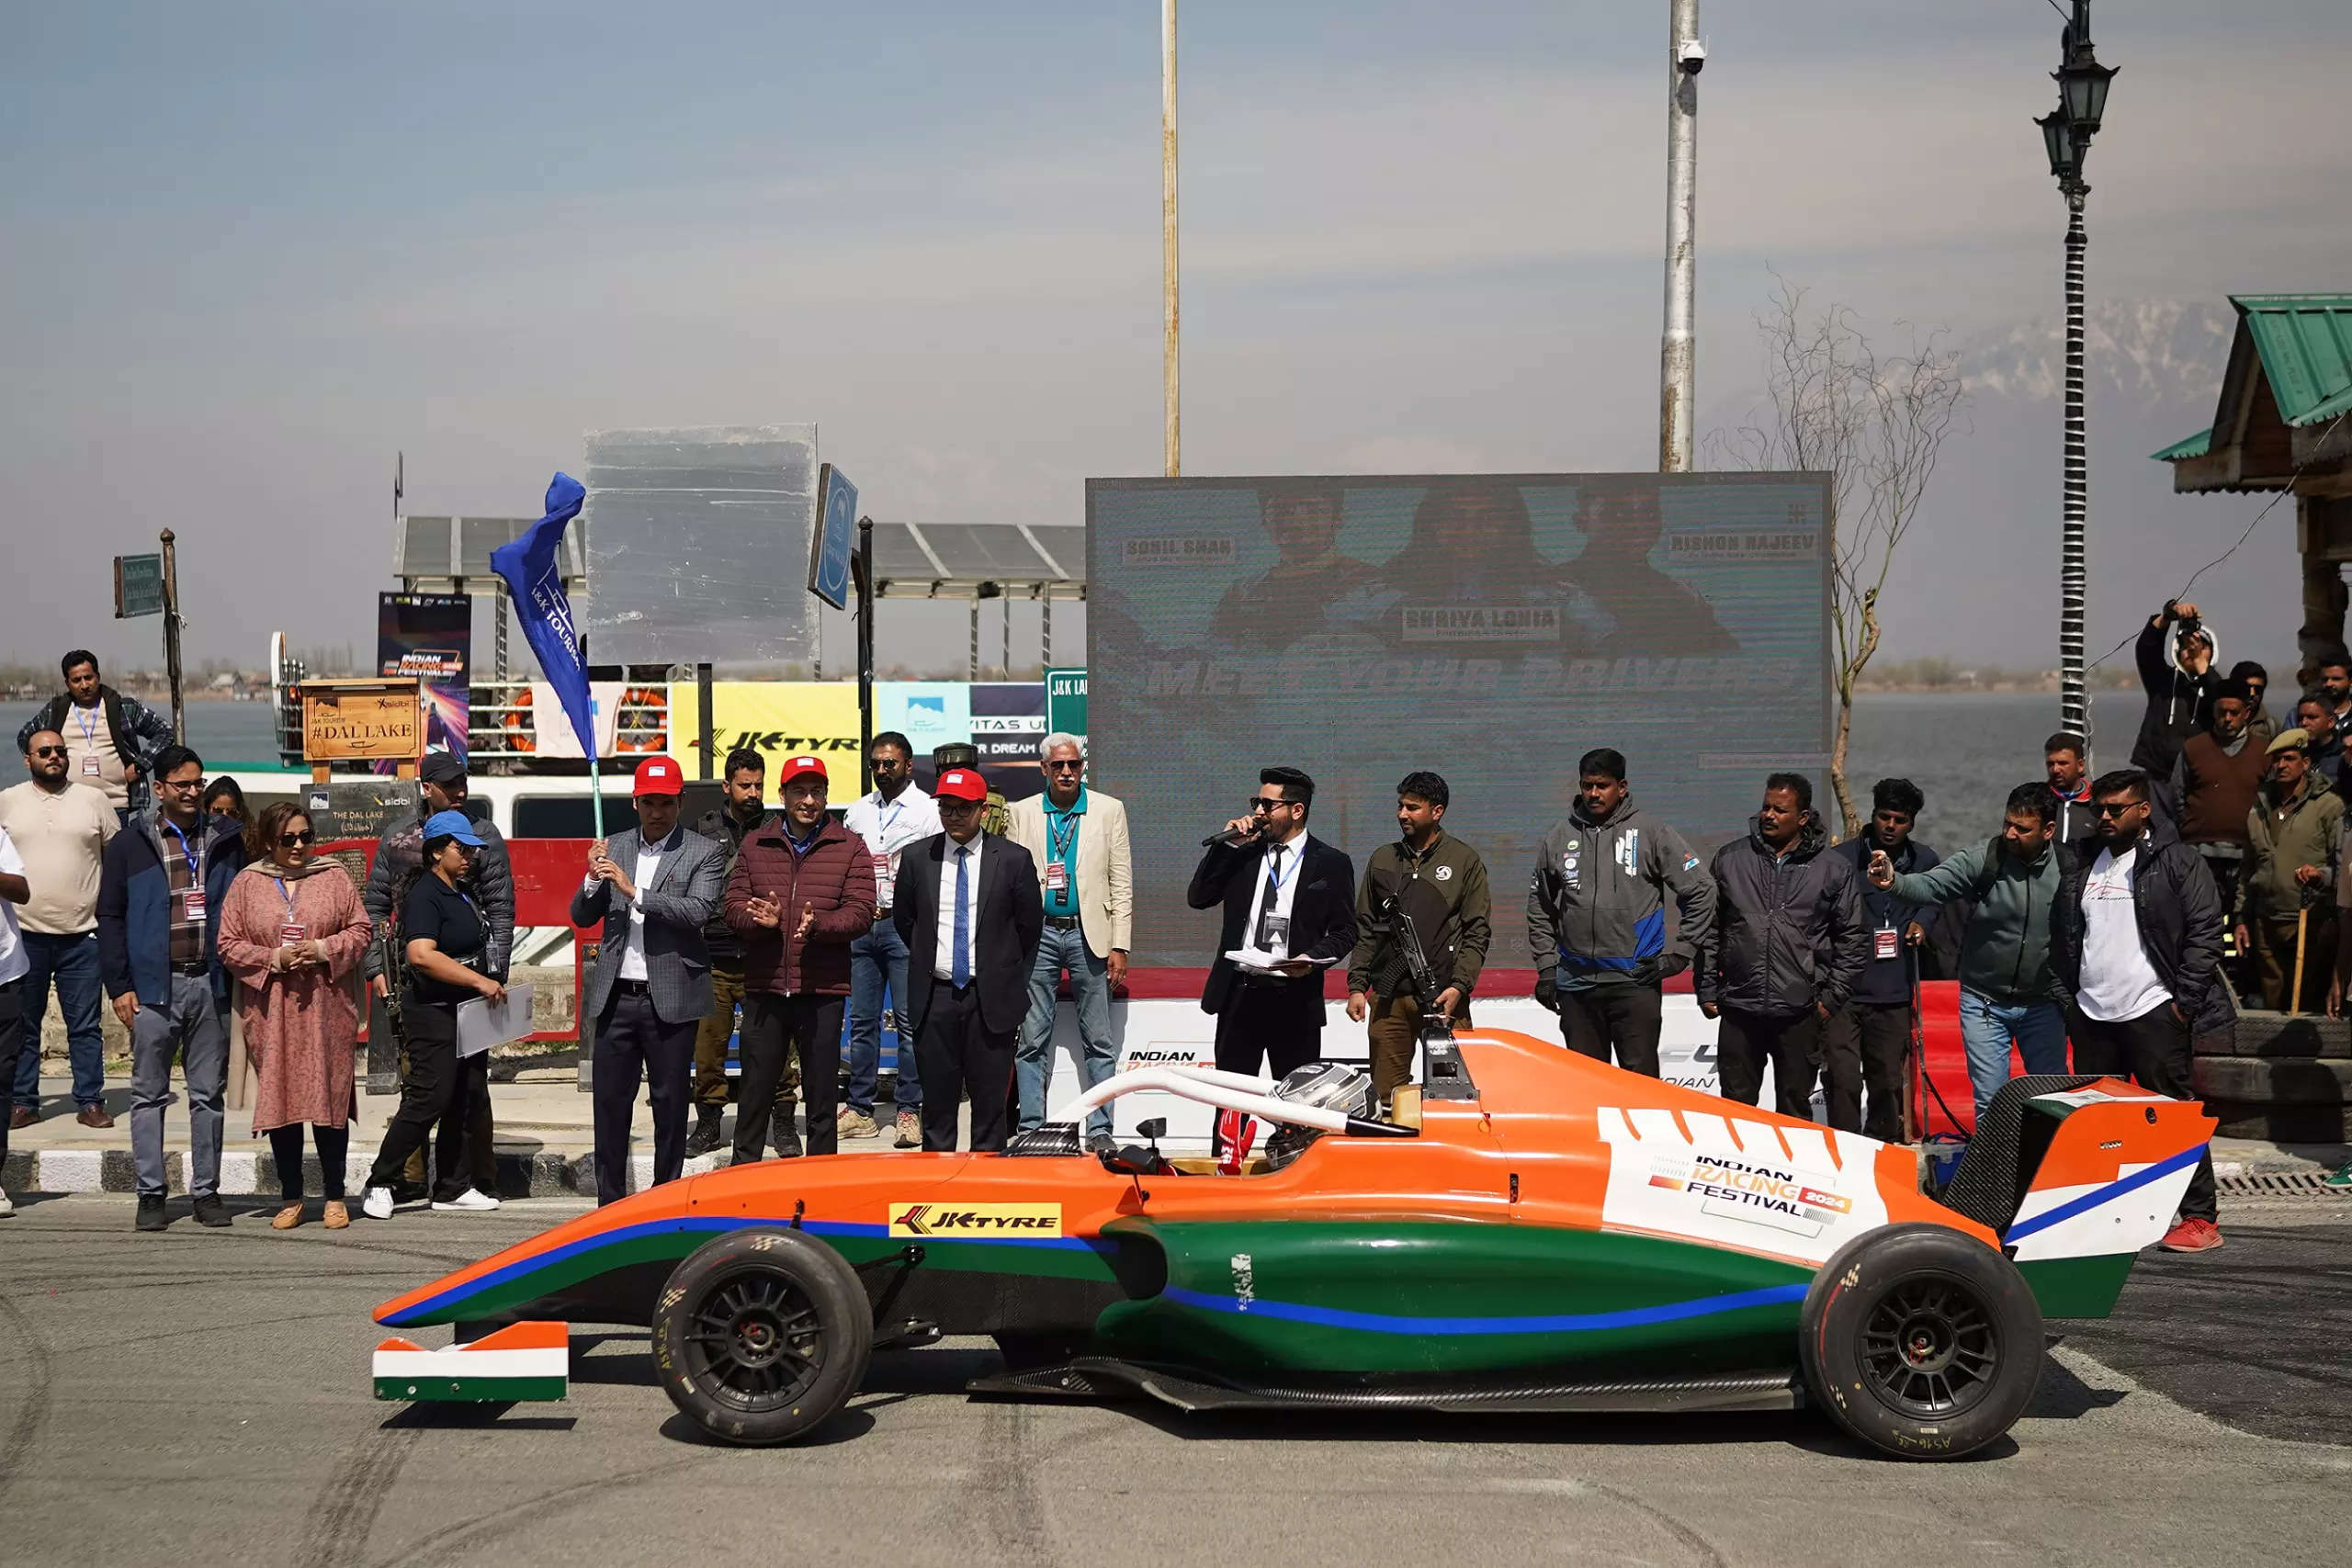 <p>Spectators in Srinagar got an early glimpse of what they can expect when the season gets underway, with a showcase of the Wolf GB08 cars and Formula 4 cars driven by young motorsport icons.</p>